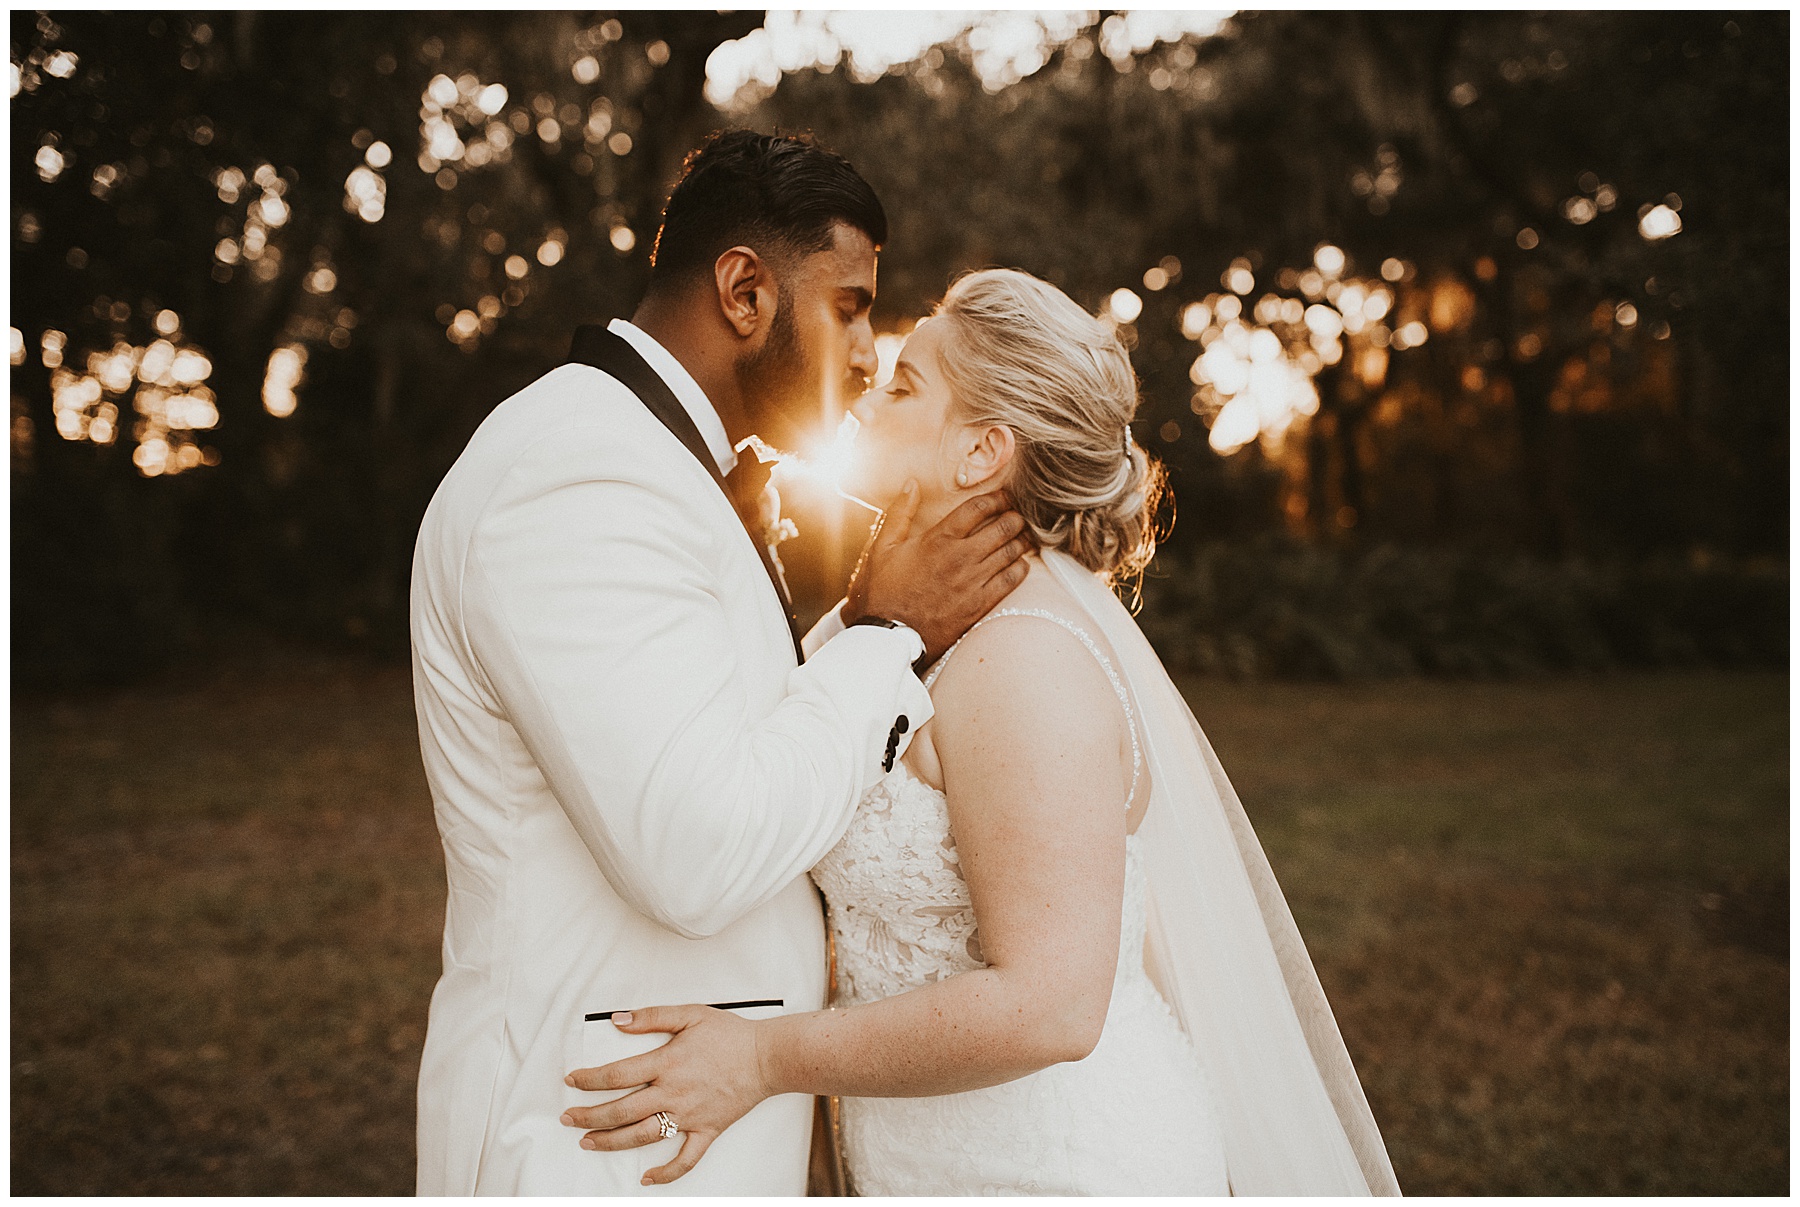 Bride and groom portraits at sunset, in Dover Florida - Photographed by Juju Photography - Destination wedding photographer